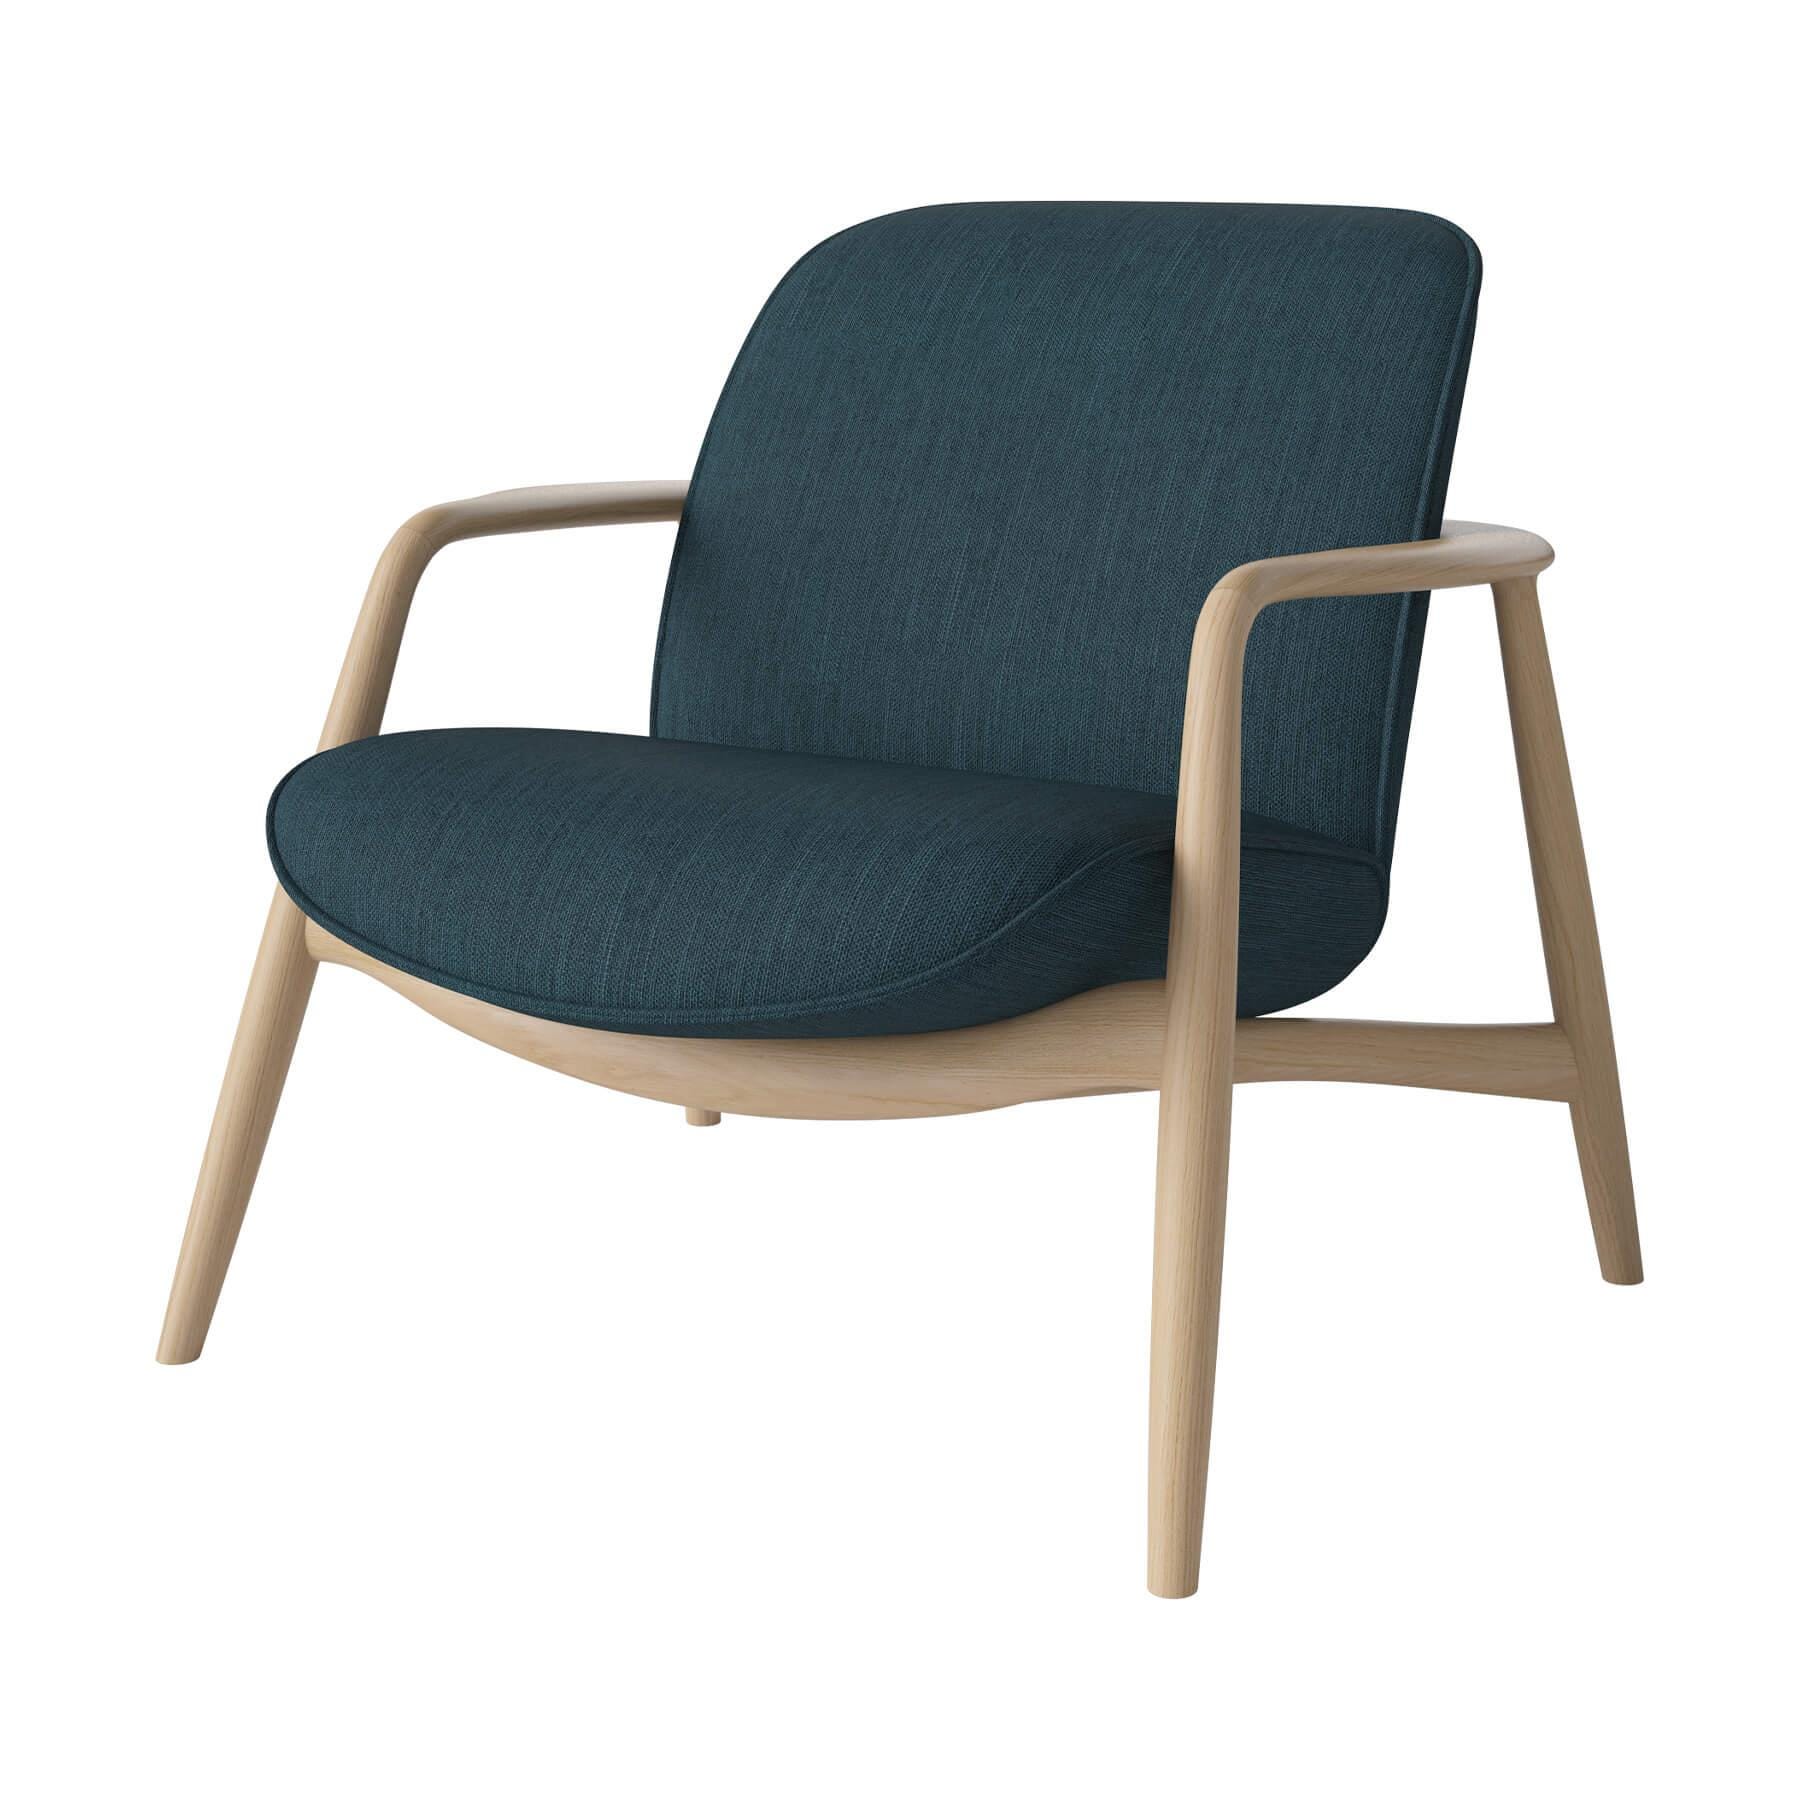 Bolia Bowie Armchair White Oiled Oak Baize Dust Blue Designer Furniture From Holloways Of Ludlow